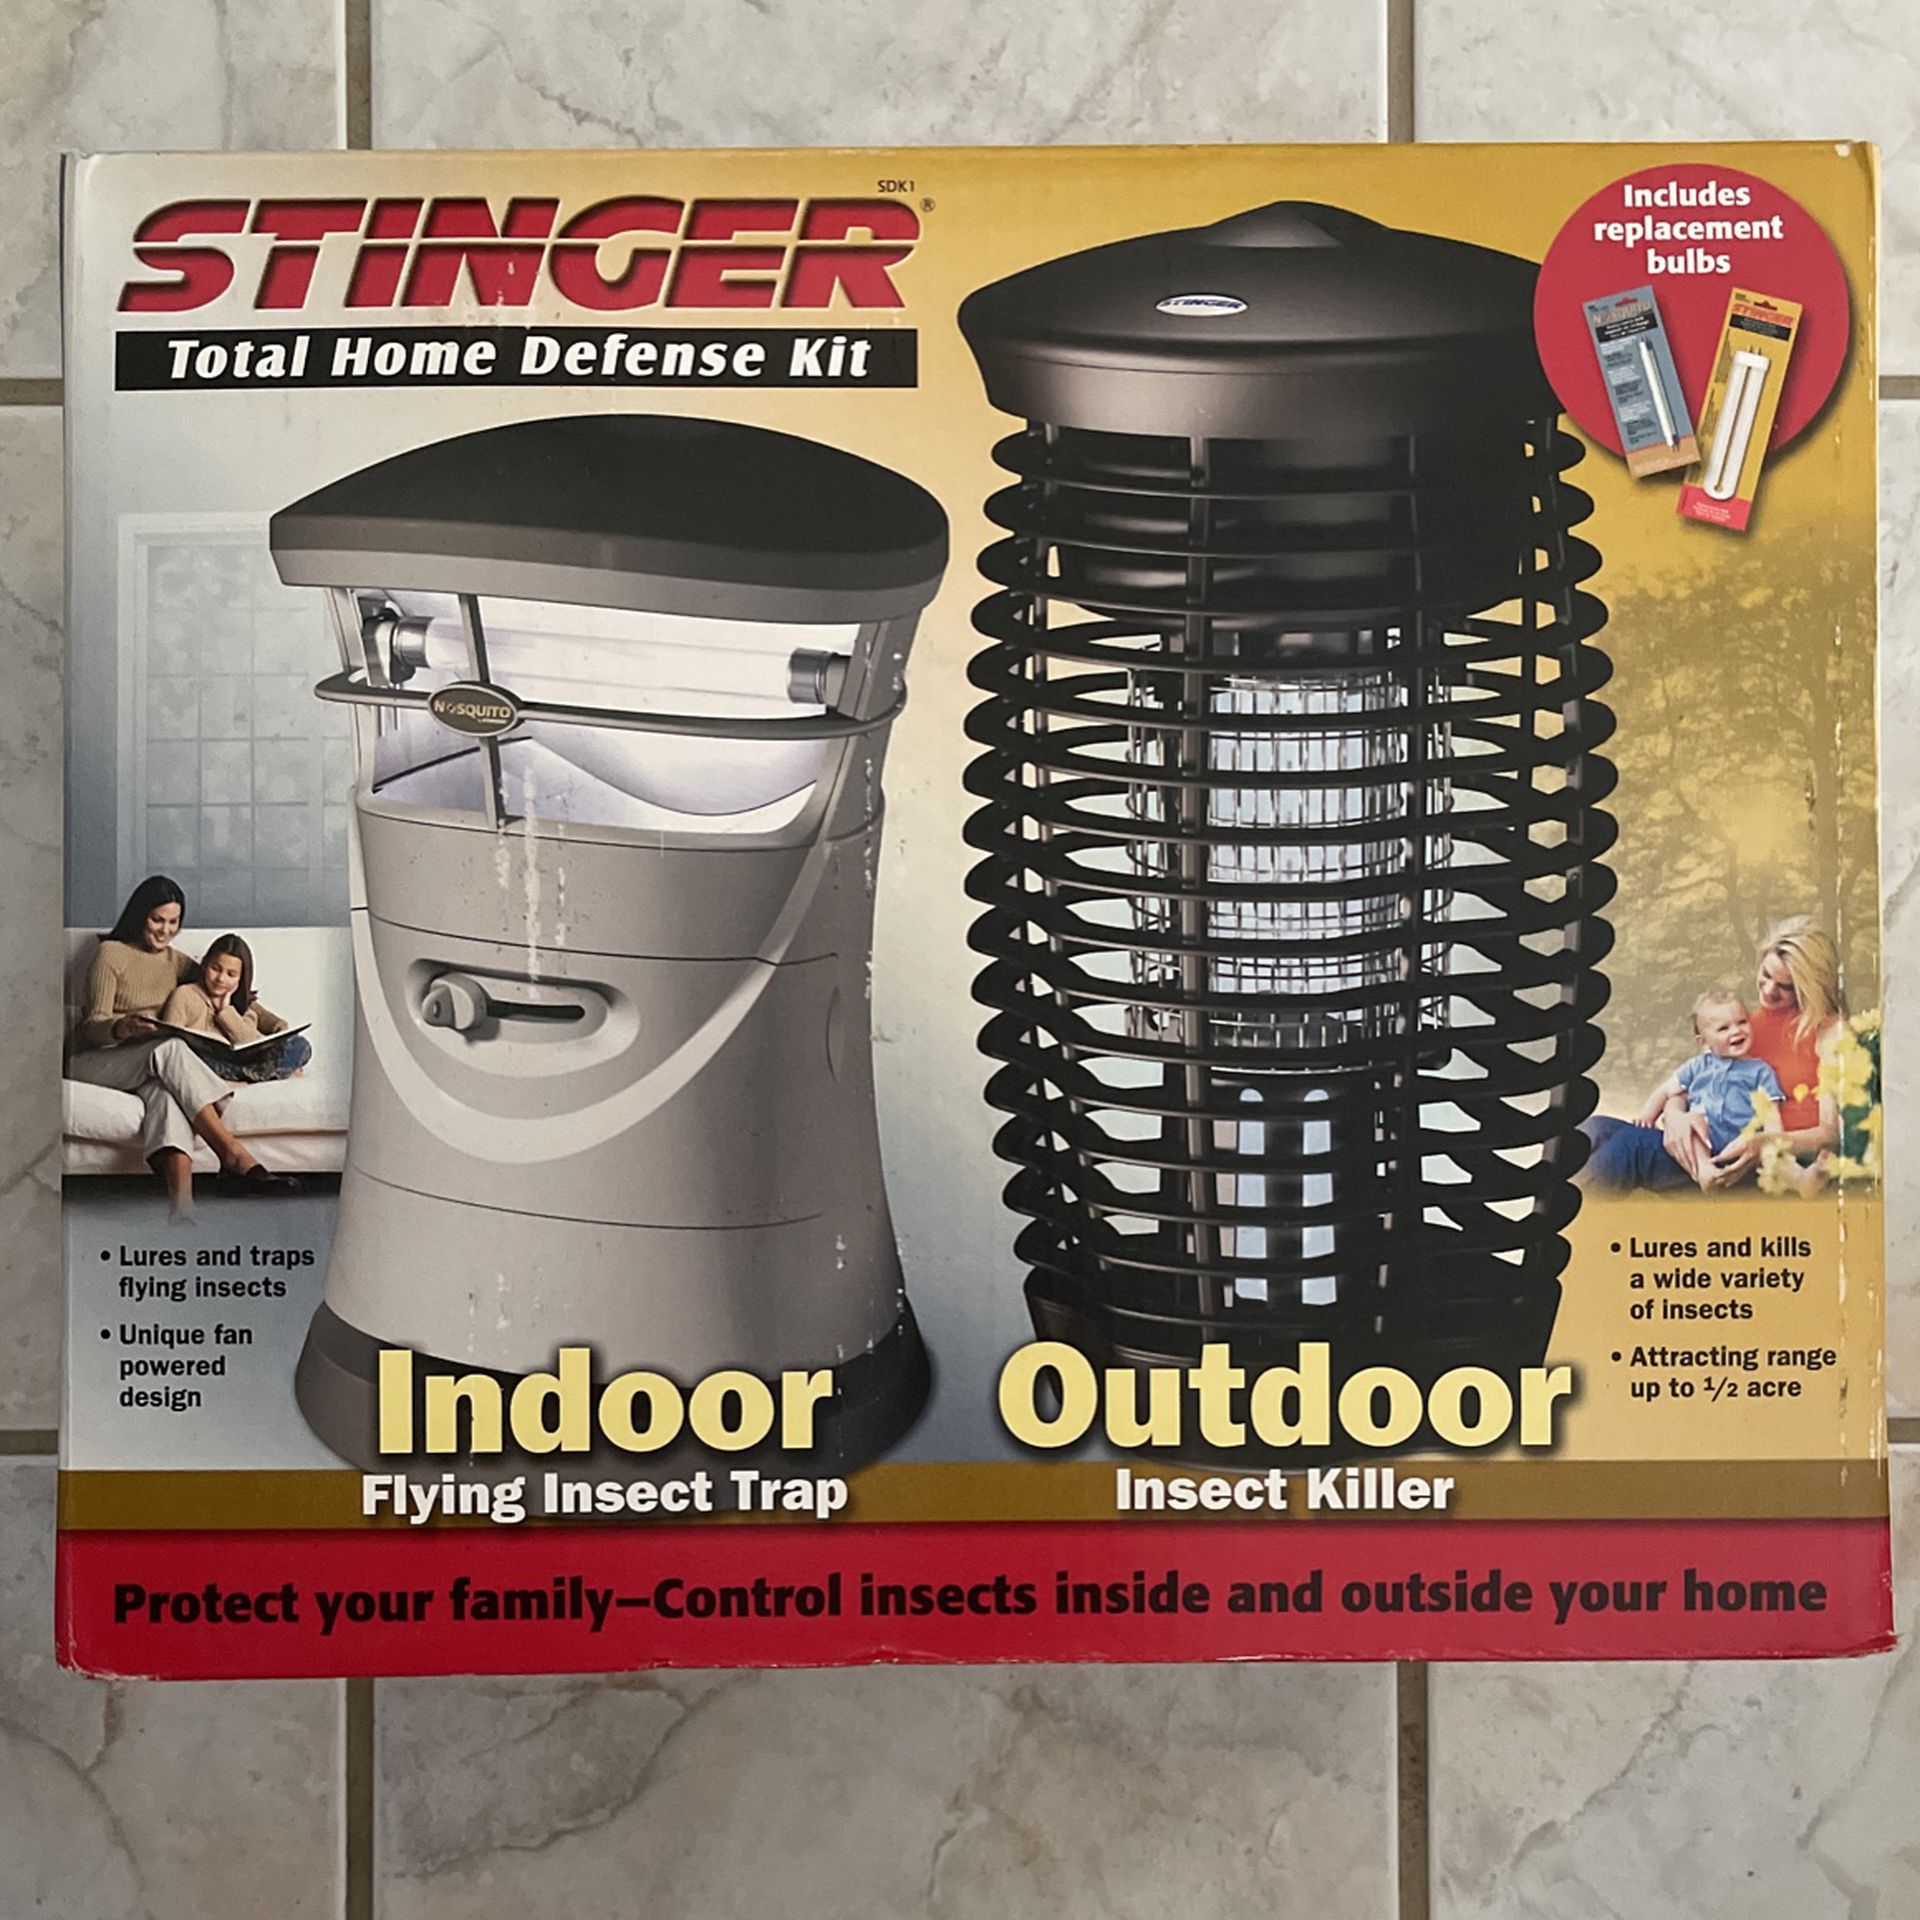 STINGER Indoor Flying Insect Trap & Outdoor Insect Killer Total Home  Defense Kit Brand New $50 for Sale in Sienna Plant, TX - OfferUp